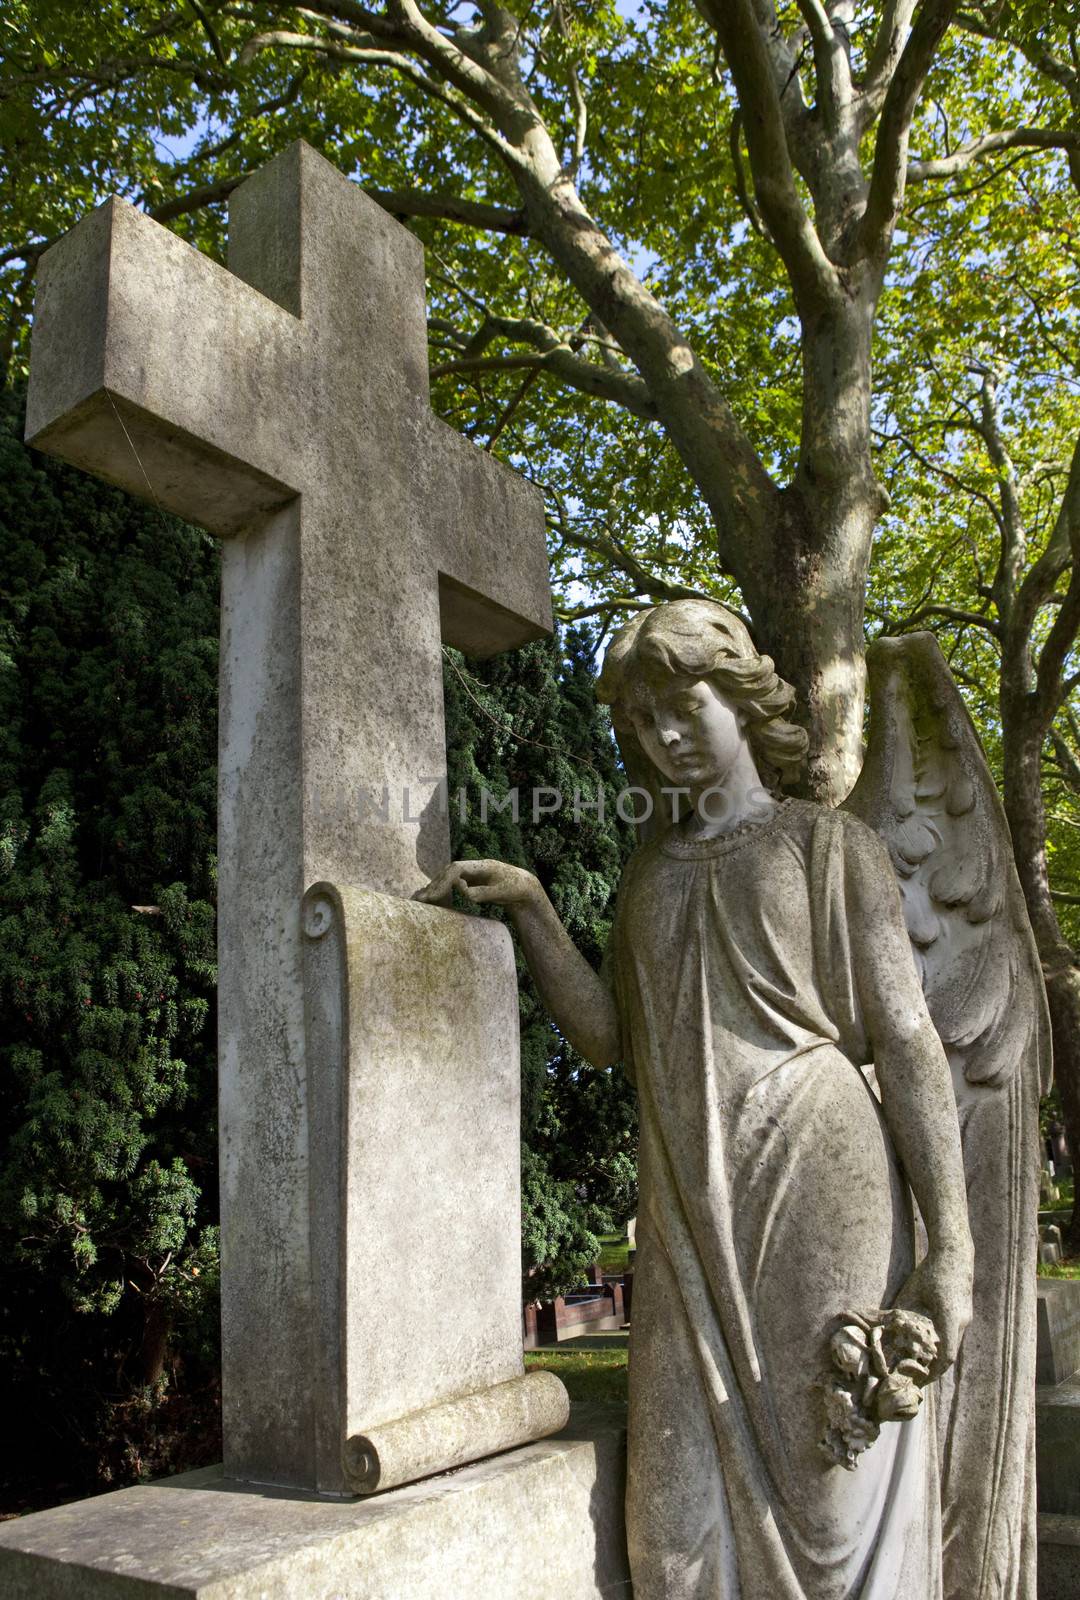 An Angel and Cross in a London graveyard.